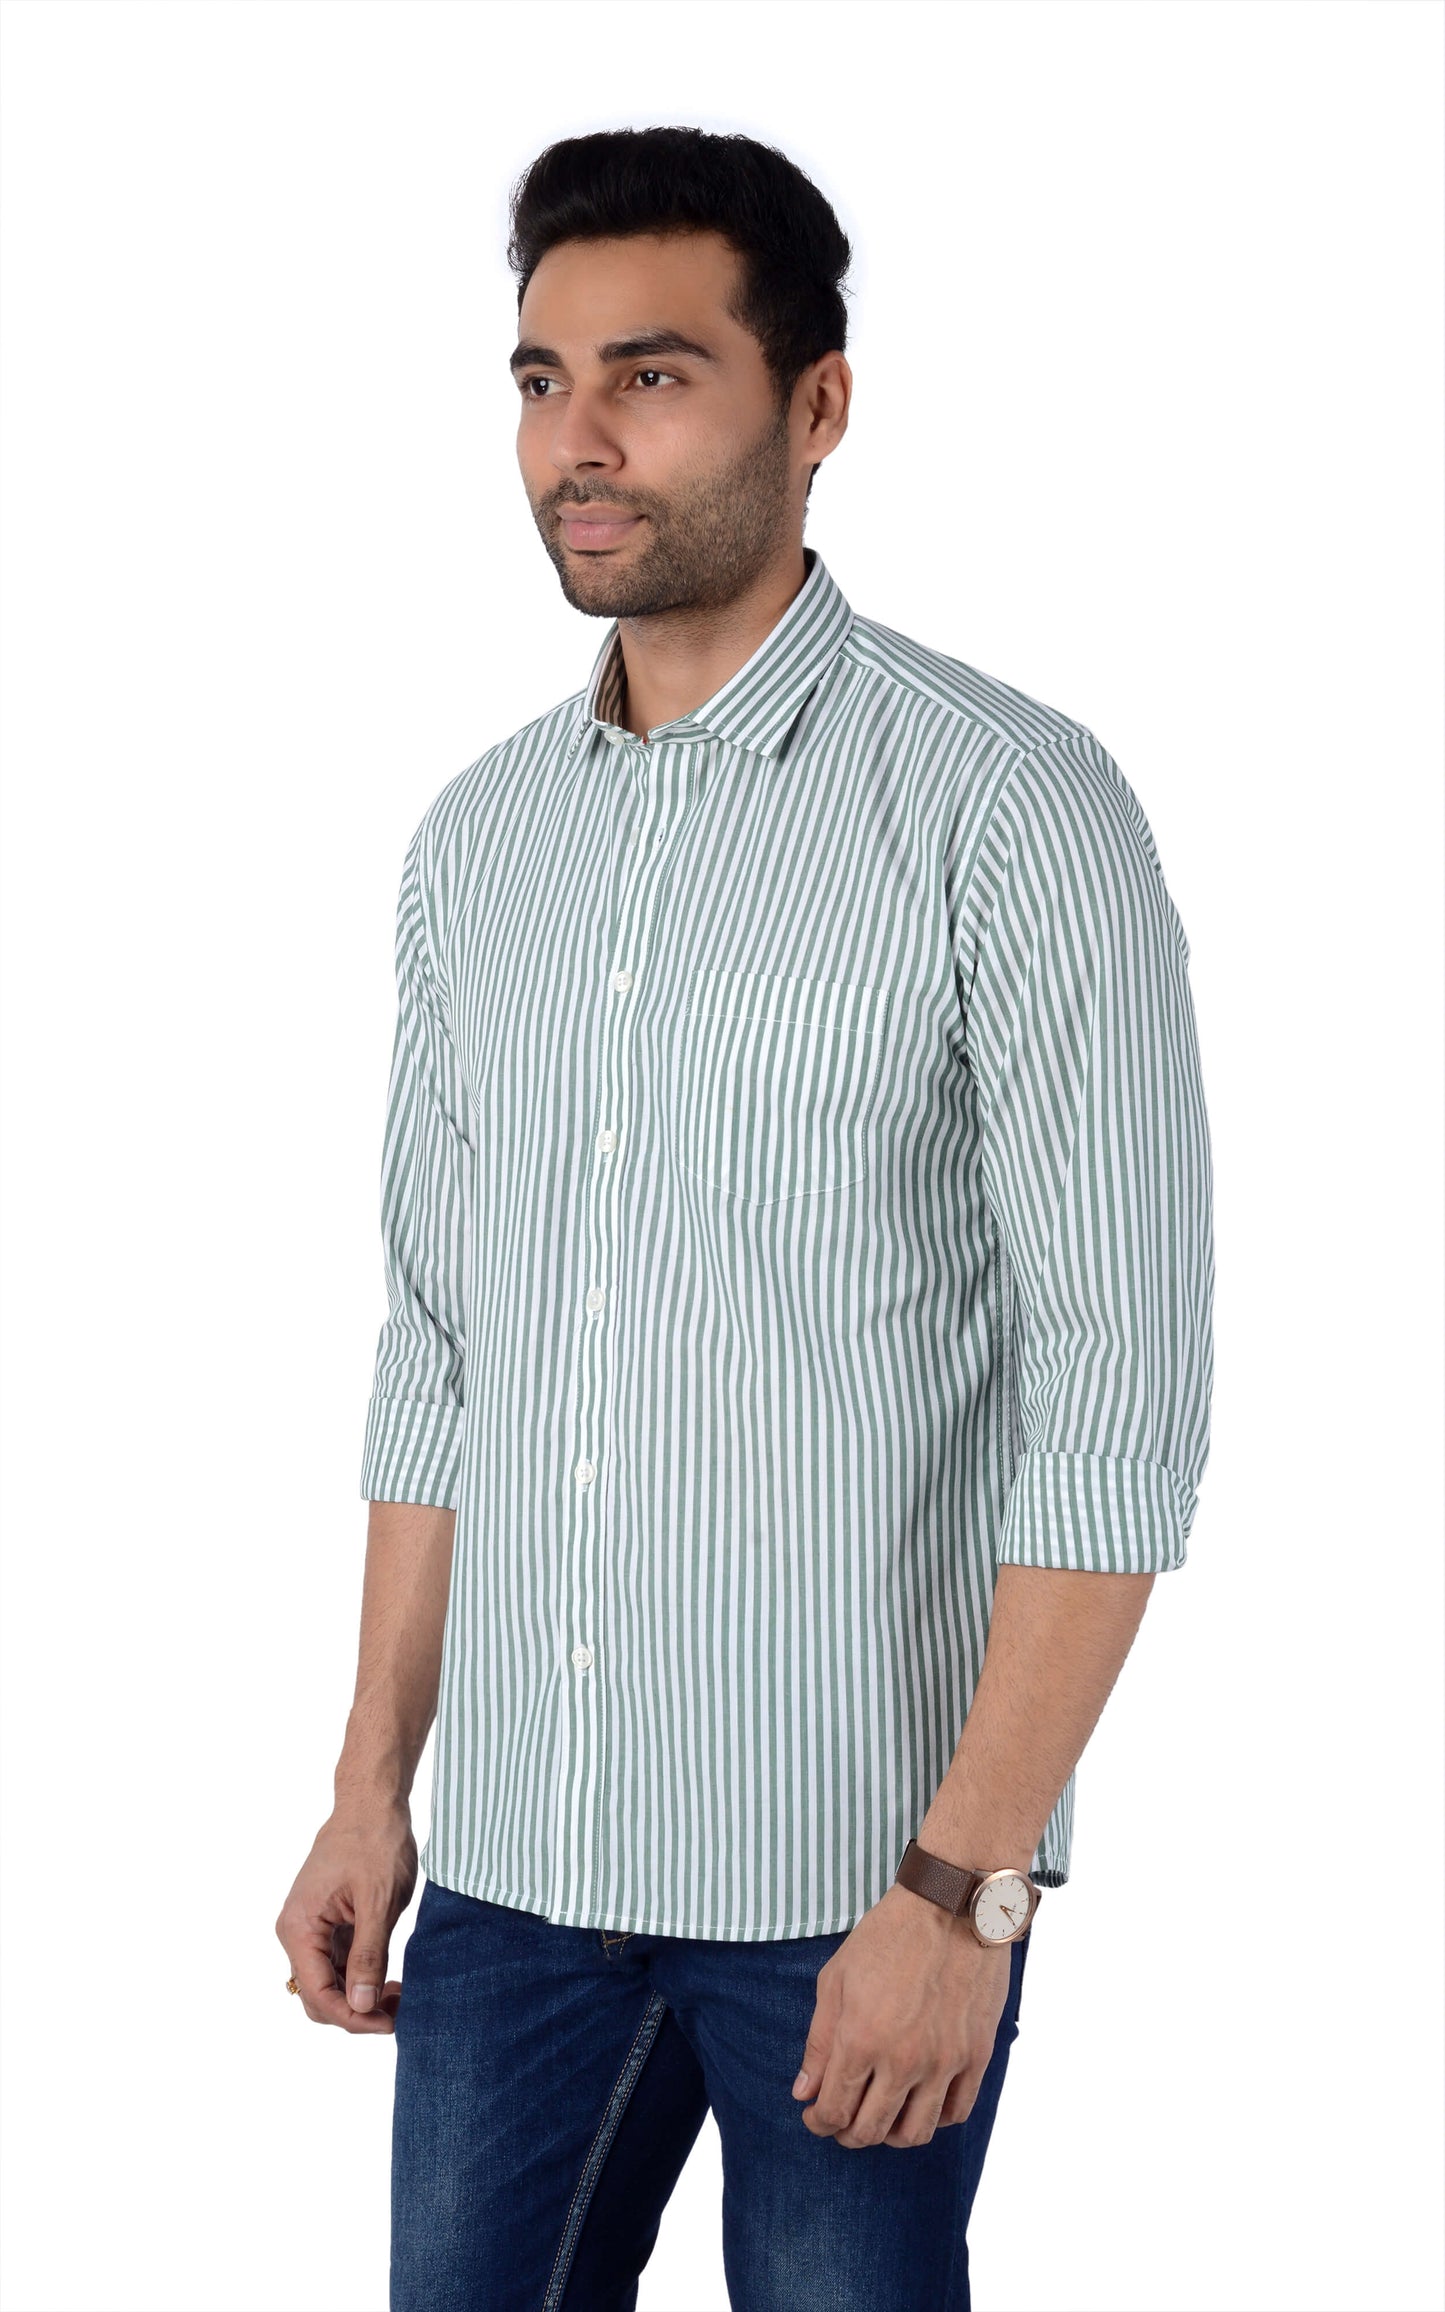 5thanfold Men's Casual Pure Cotton Full Sleeve Striped Green Slim Fit Shirt